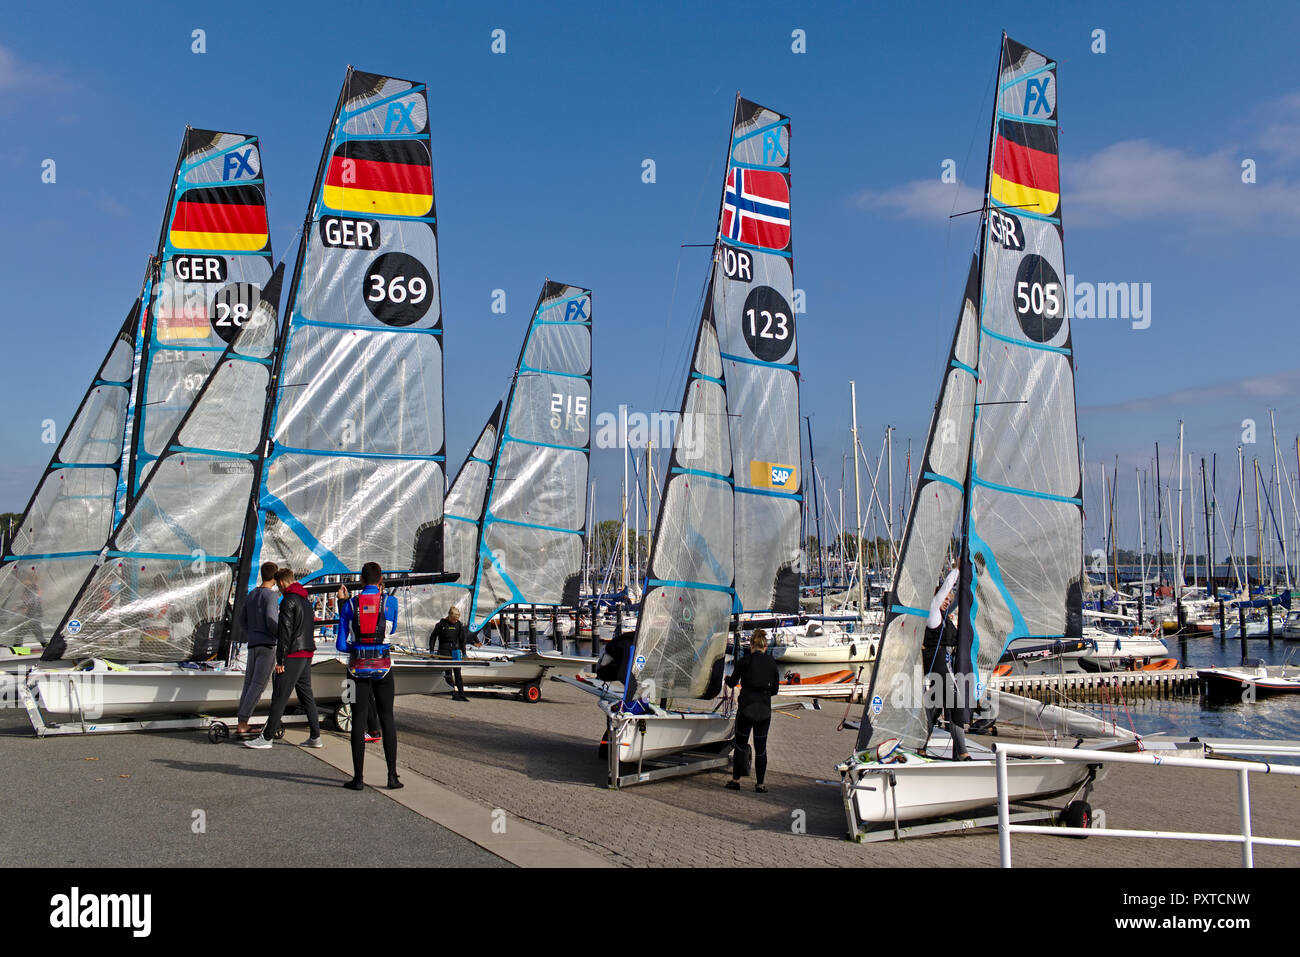 Kiel, Germany - September 9th, 2018 - Several 49er FX dinghies on the shore with their crew after training Stock Photo